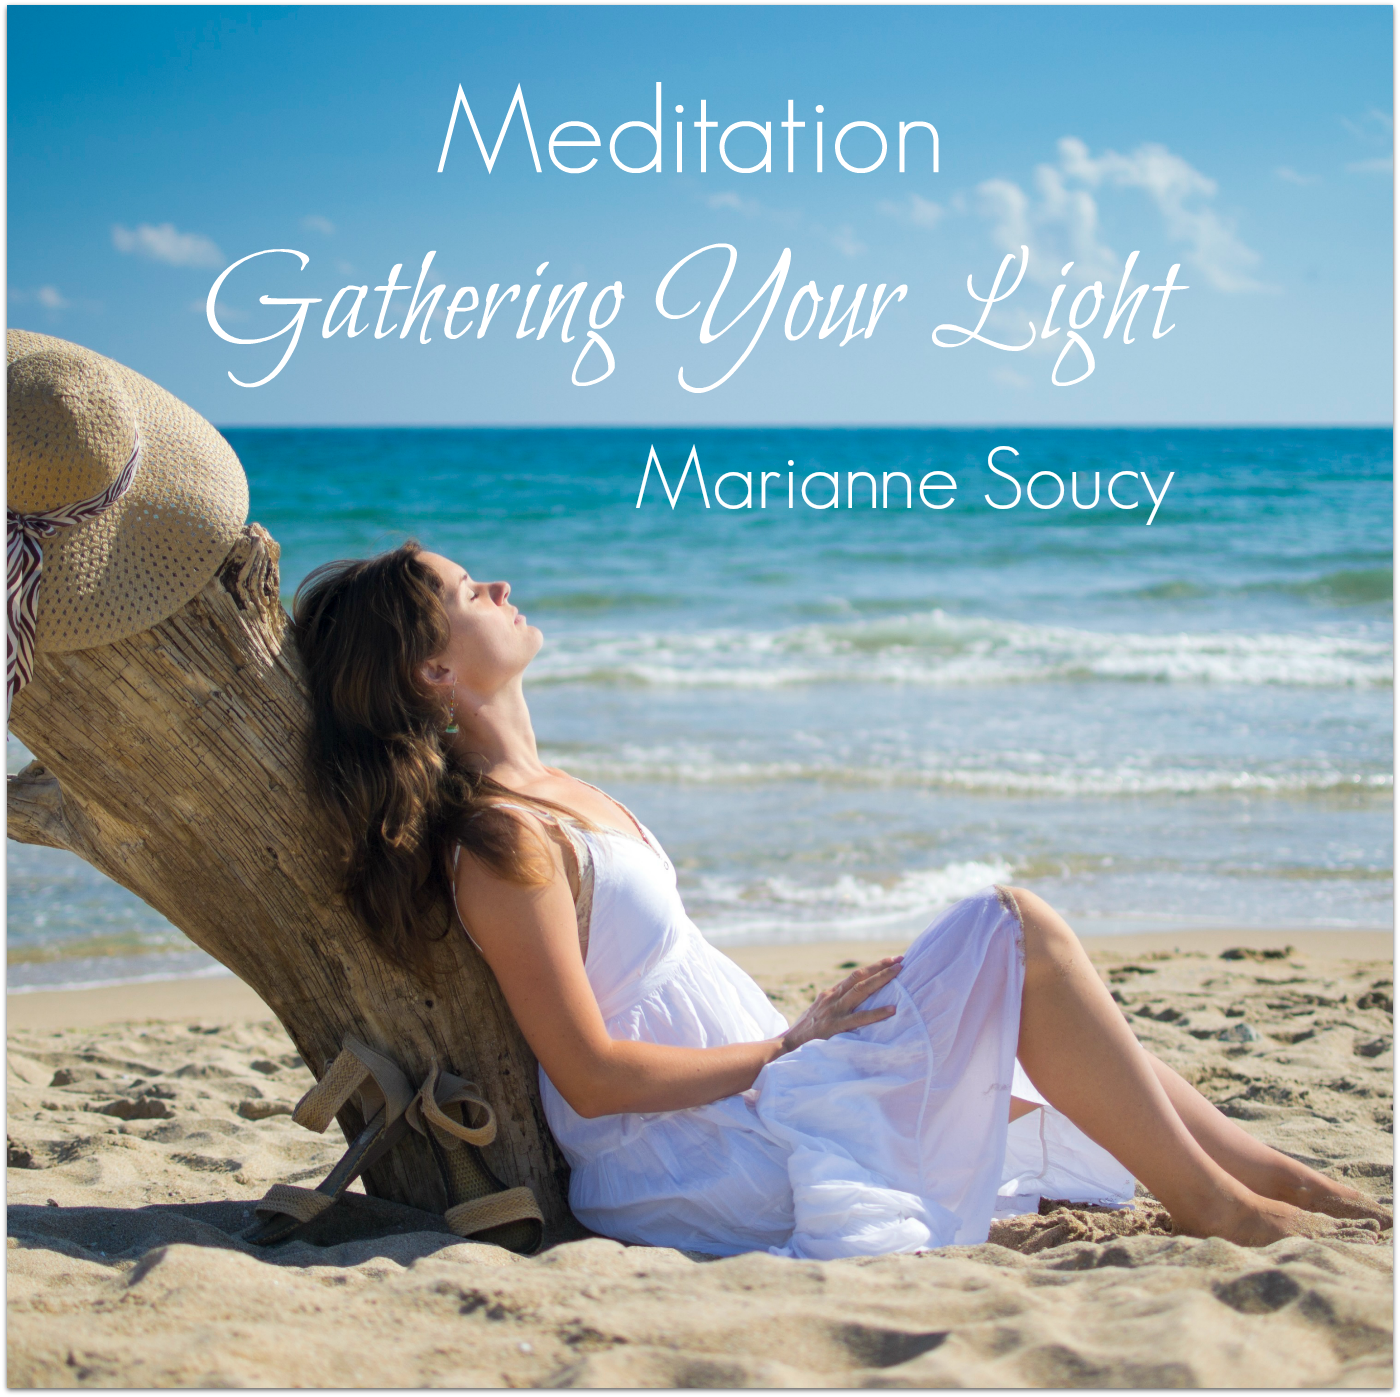 Give Your Dream Wings - Gathering Your Light Meditation - Marianne Soucy 